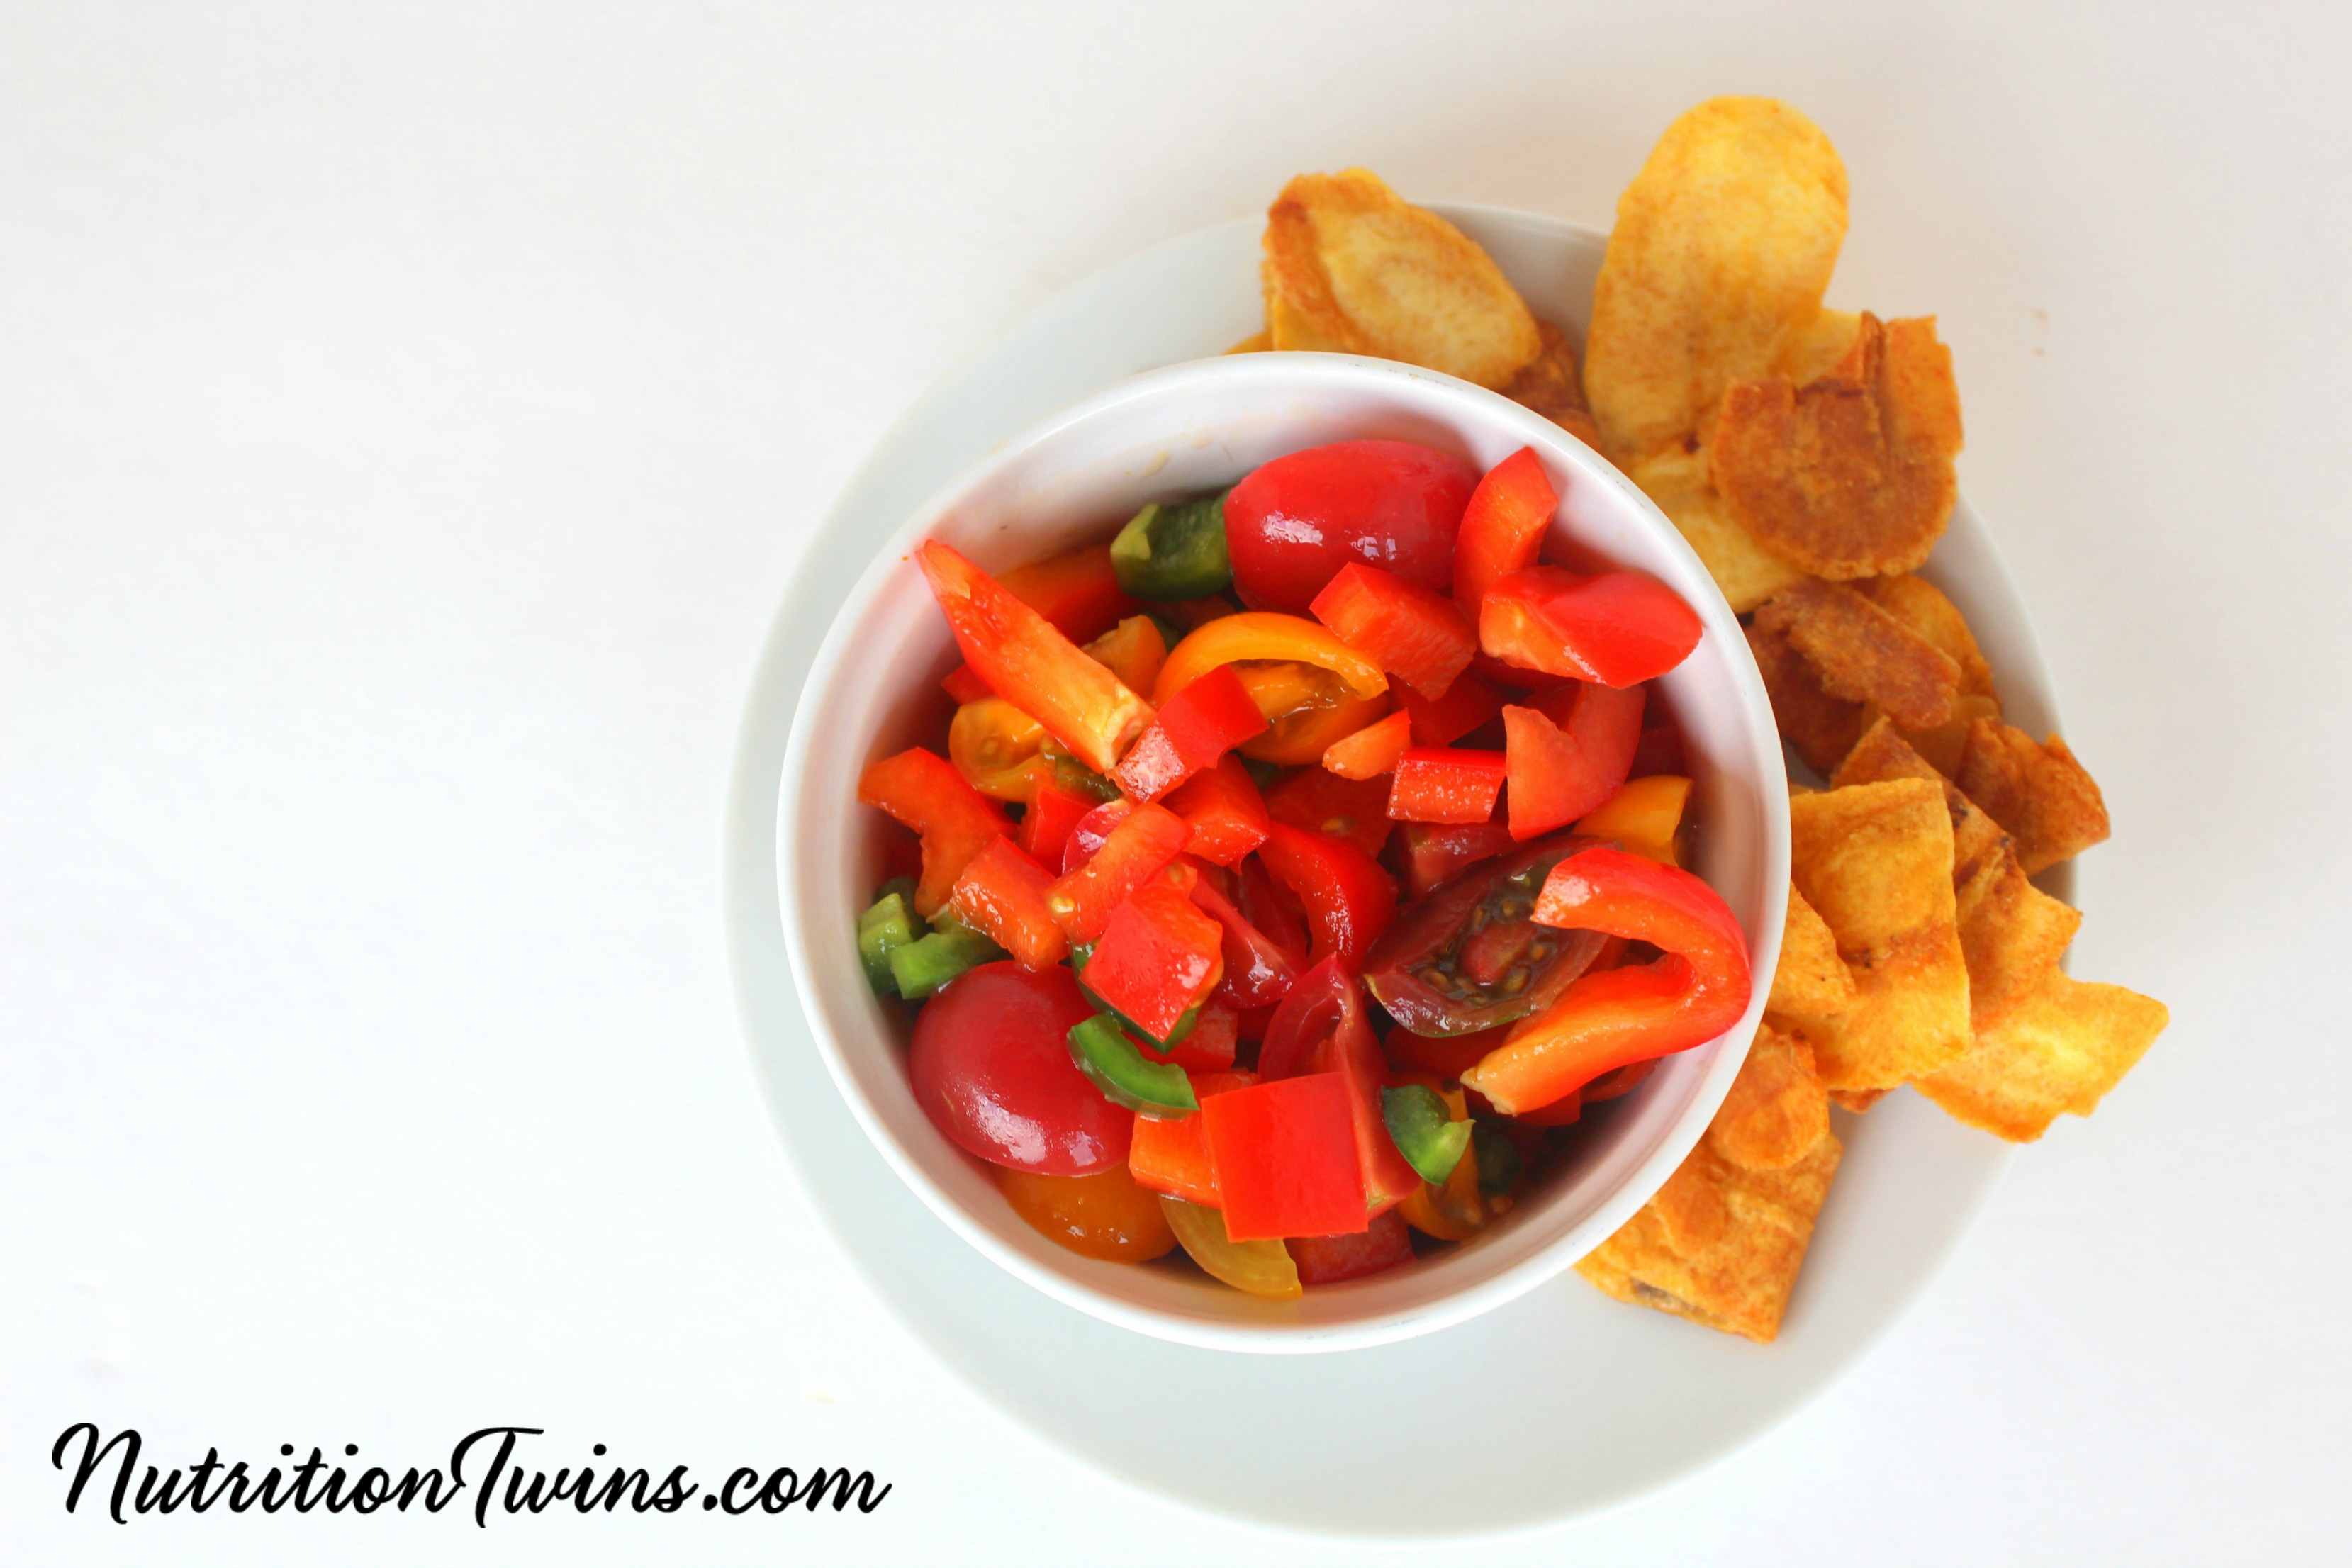 Fresh Tomato Salsa from The Nutrition Twins